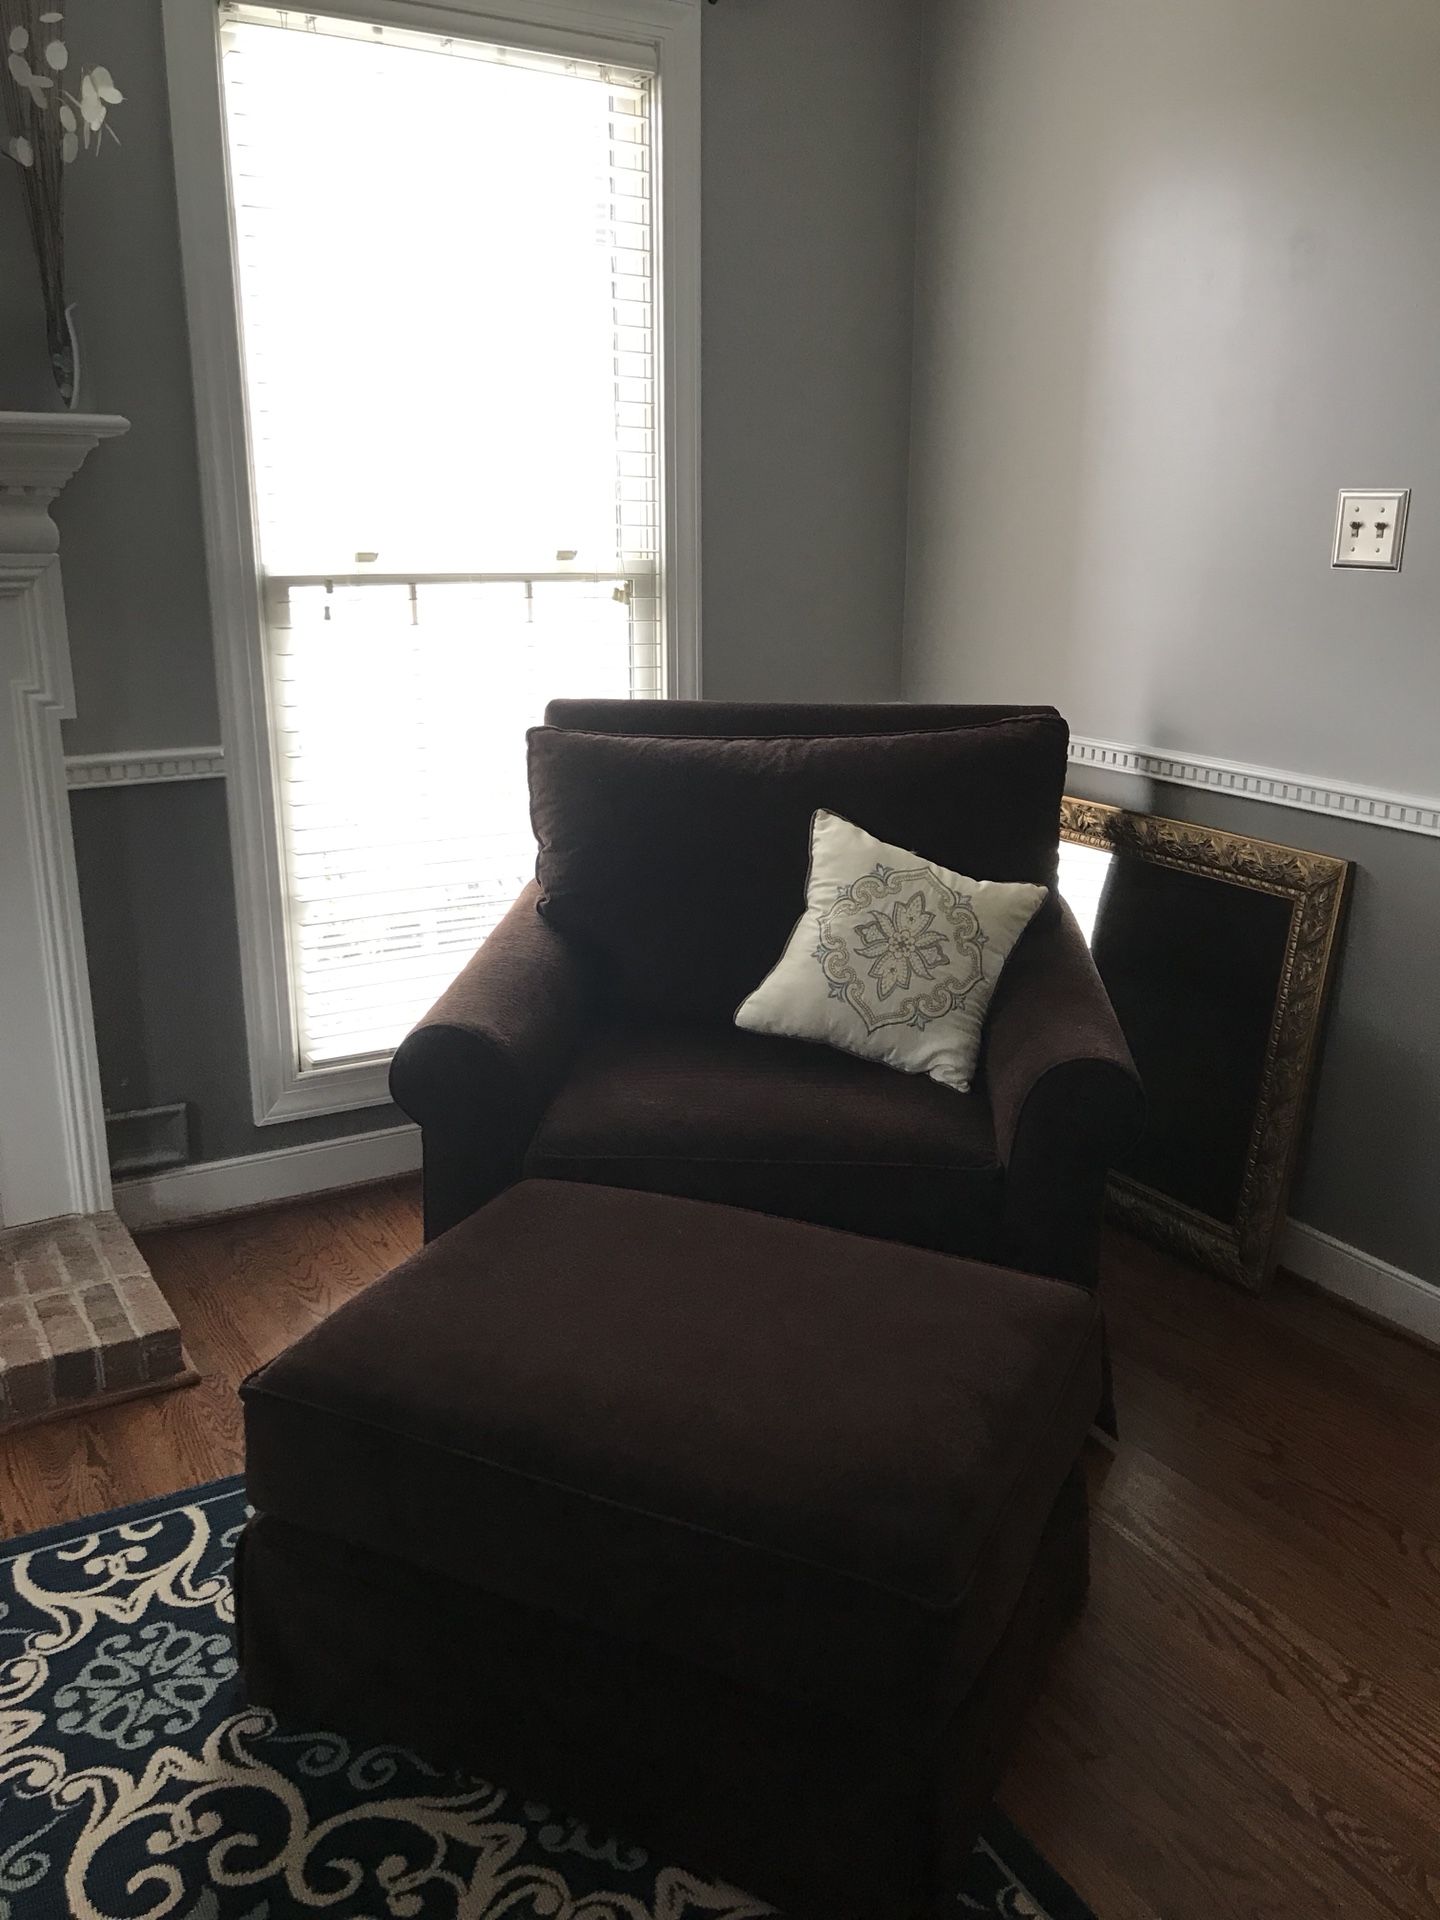 Large brown chair with ottoman